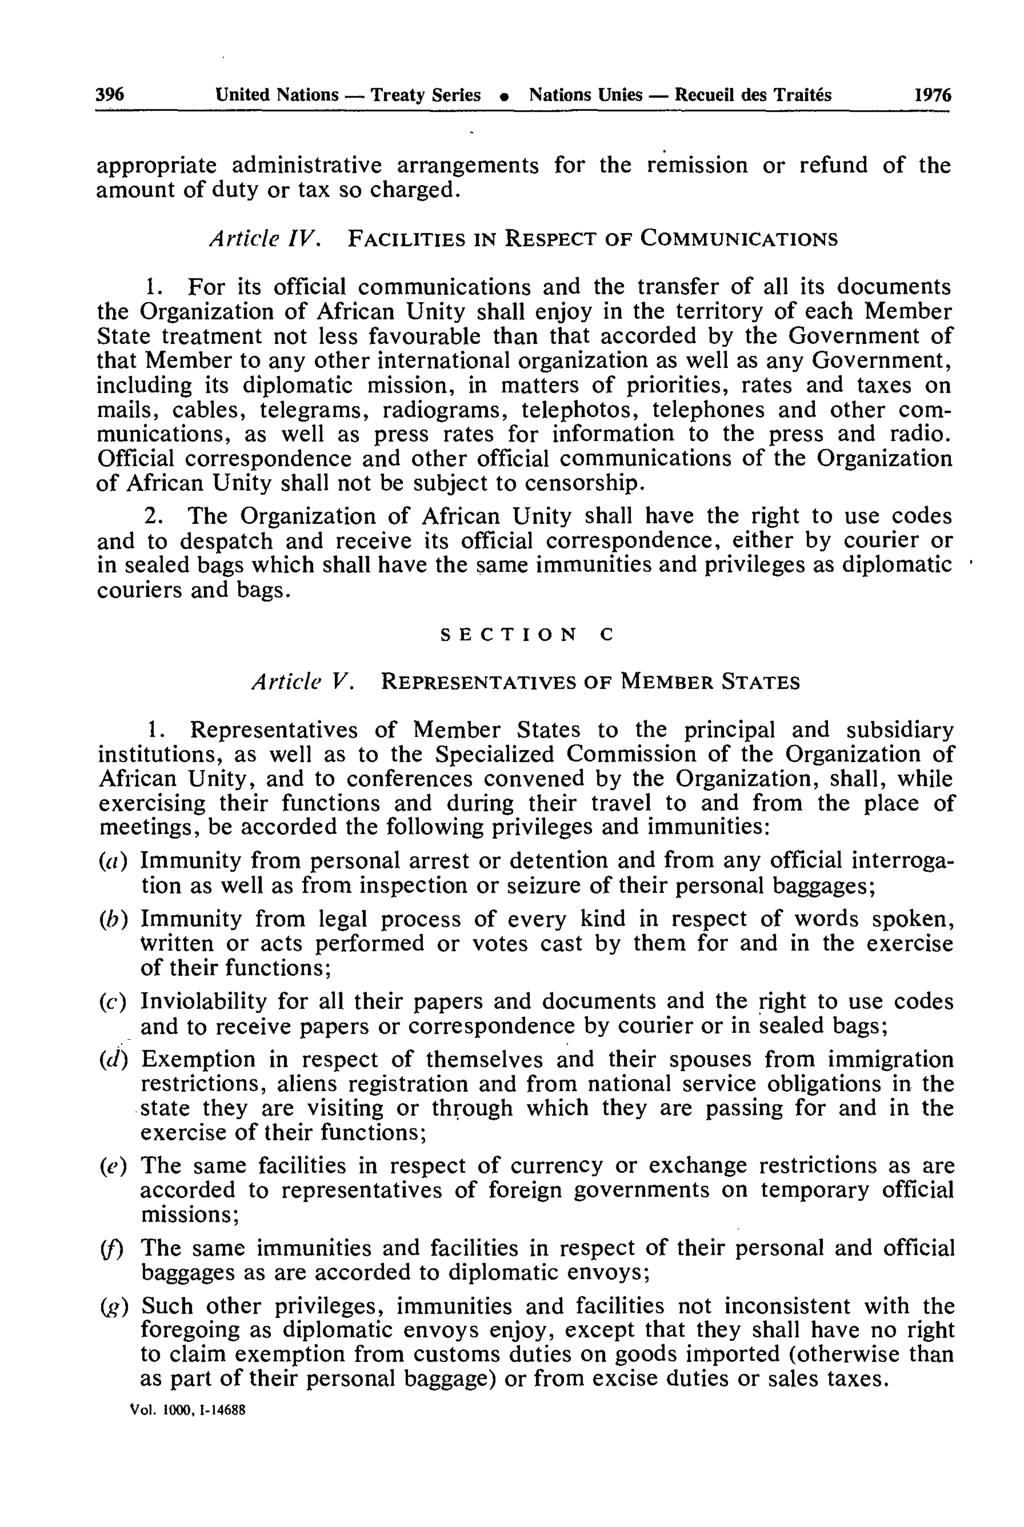 396 United Nations Treaty Series Nations Unies Recueil des Traités 1976 appropriate administrative arrangements for the remission or refund of the amount of duty or tax so charged. Article IV.